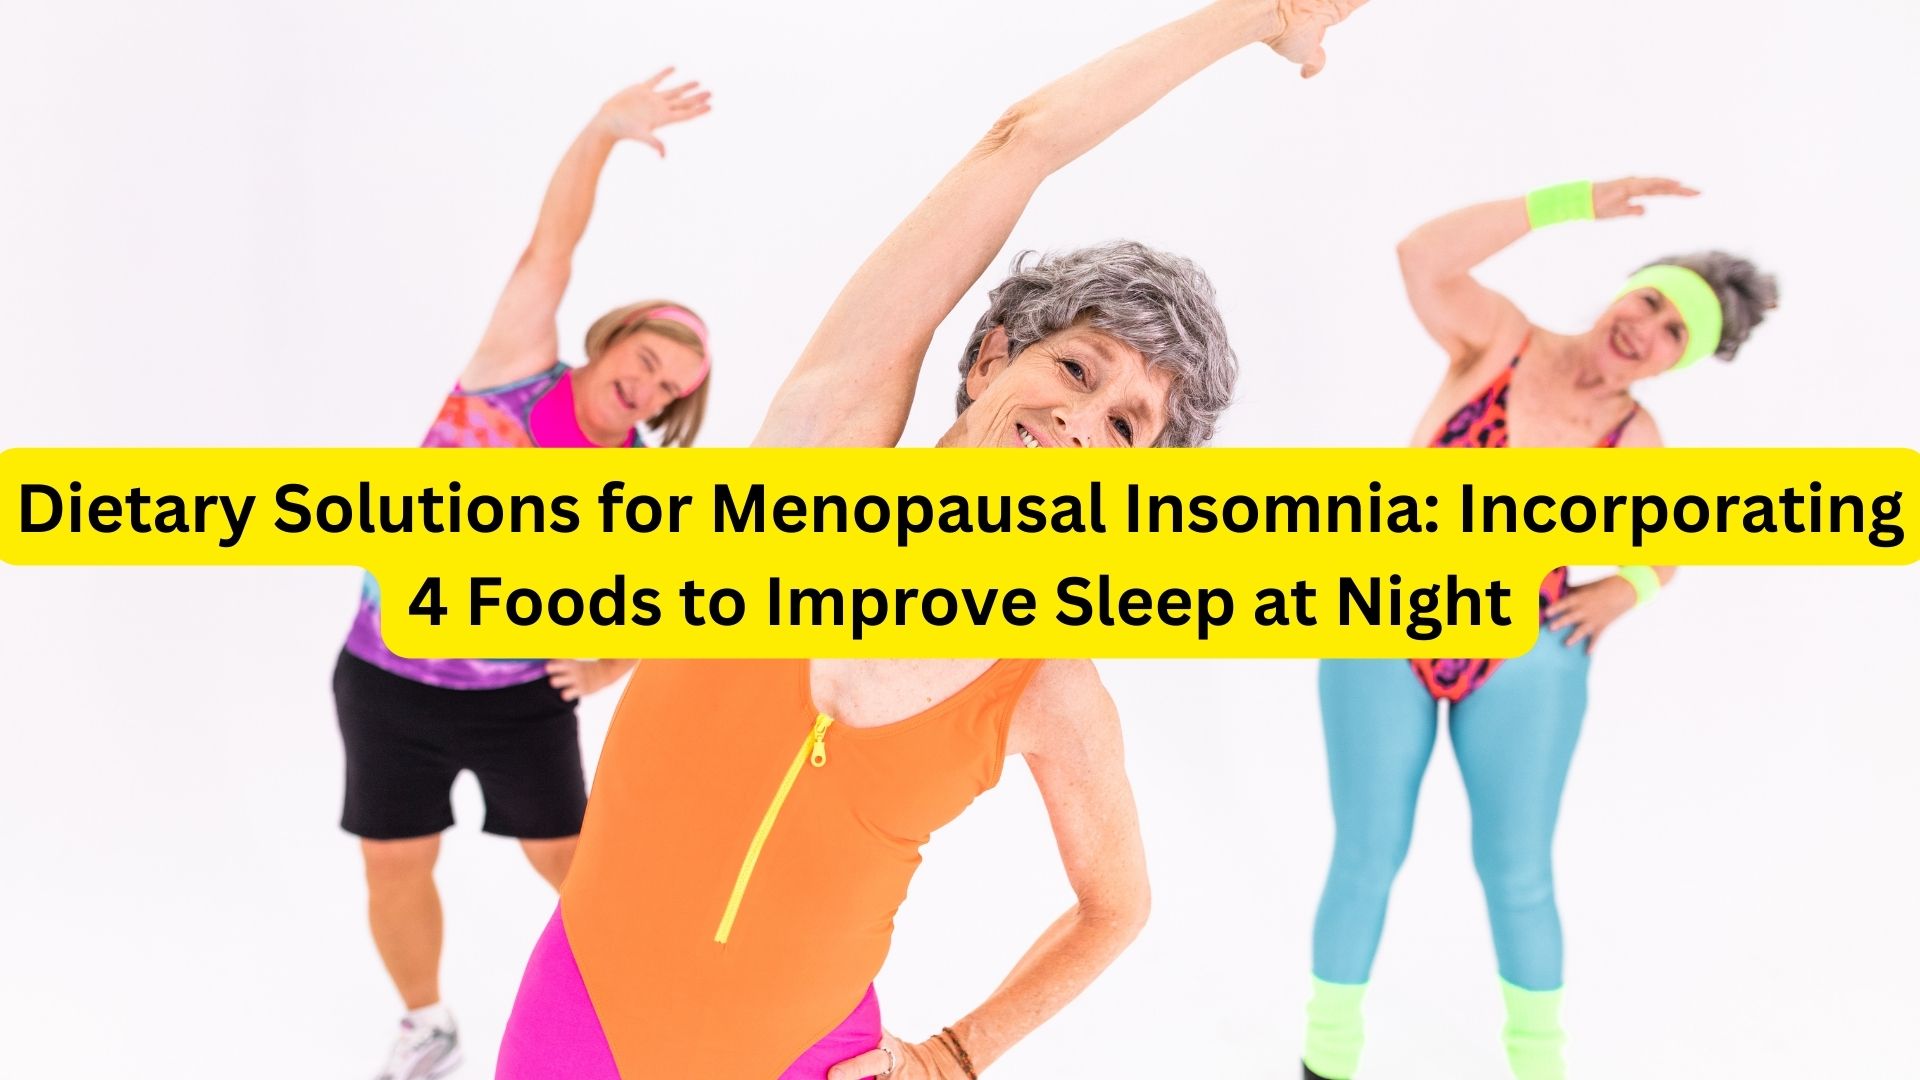 Dietary Solutions for Menopausal Insomnia: Incorporating 4 Foods to Improve Sleep at Night